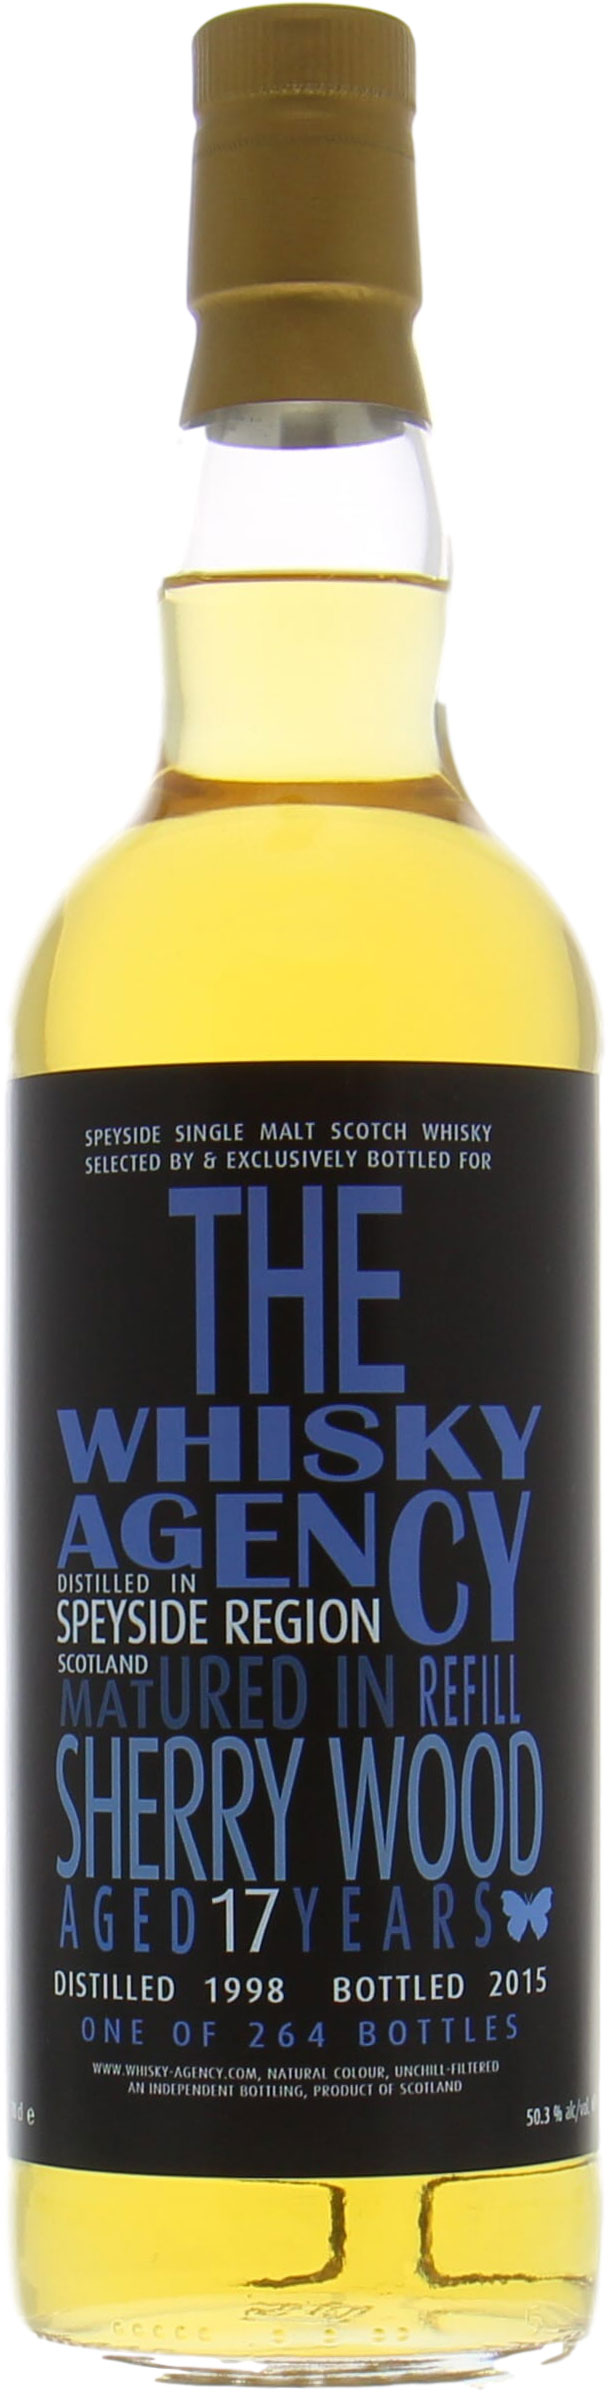 The Whisky Agency - Speyside Region The Whisky Agency 50.3% 1998 Perfect